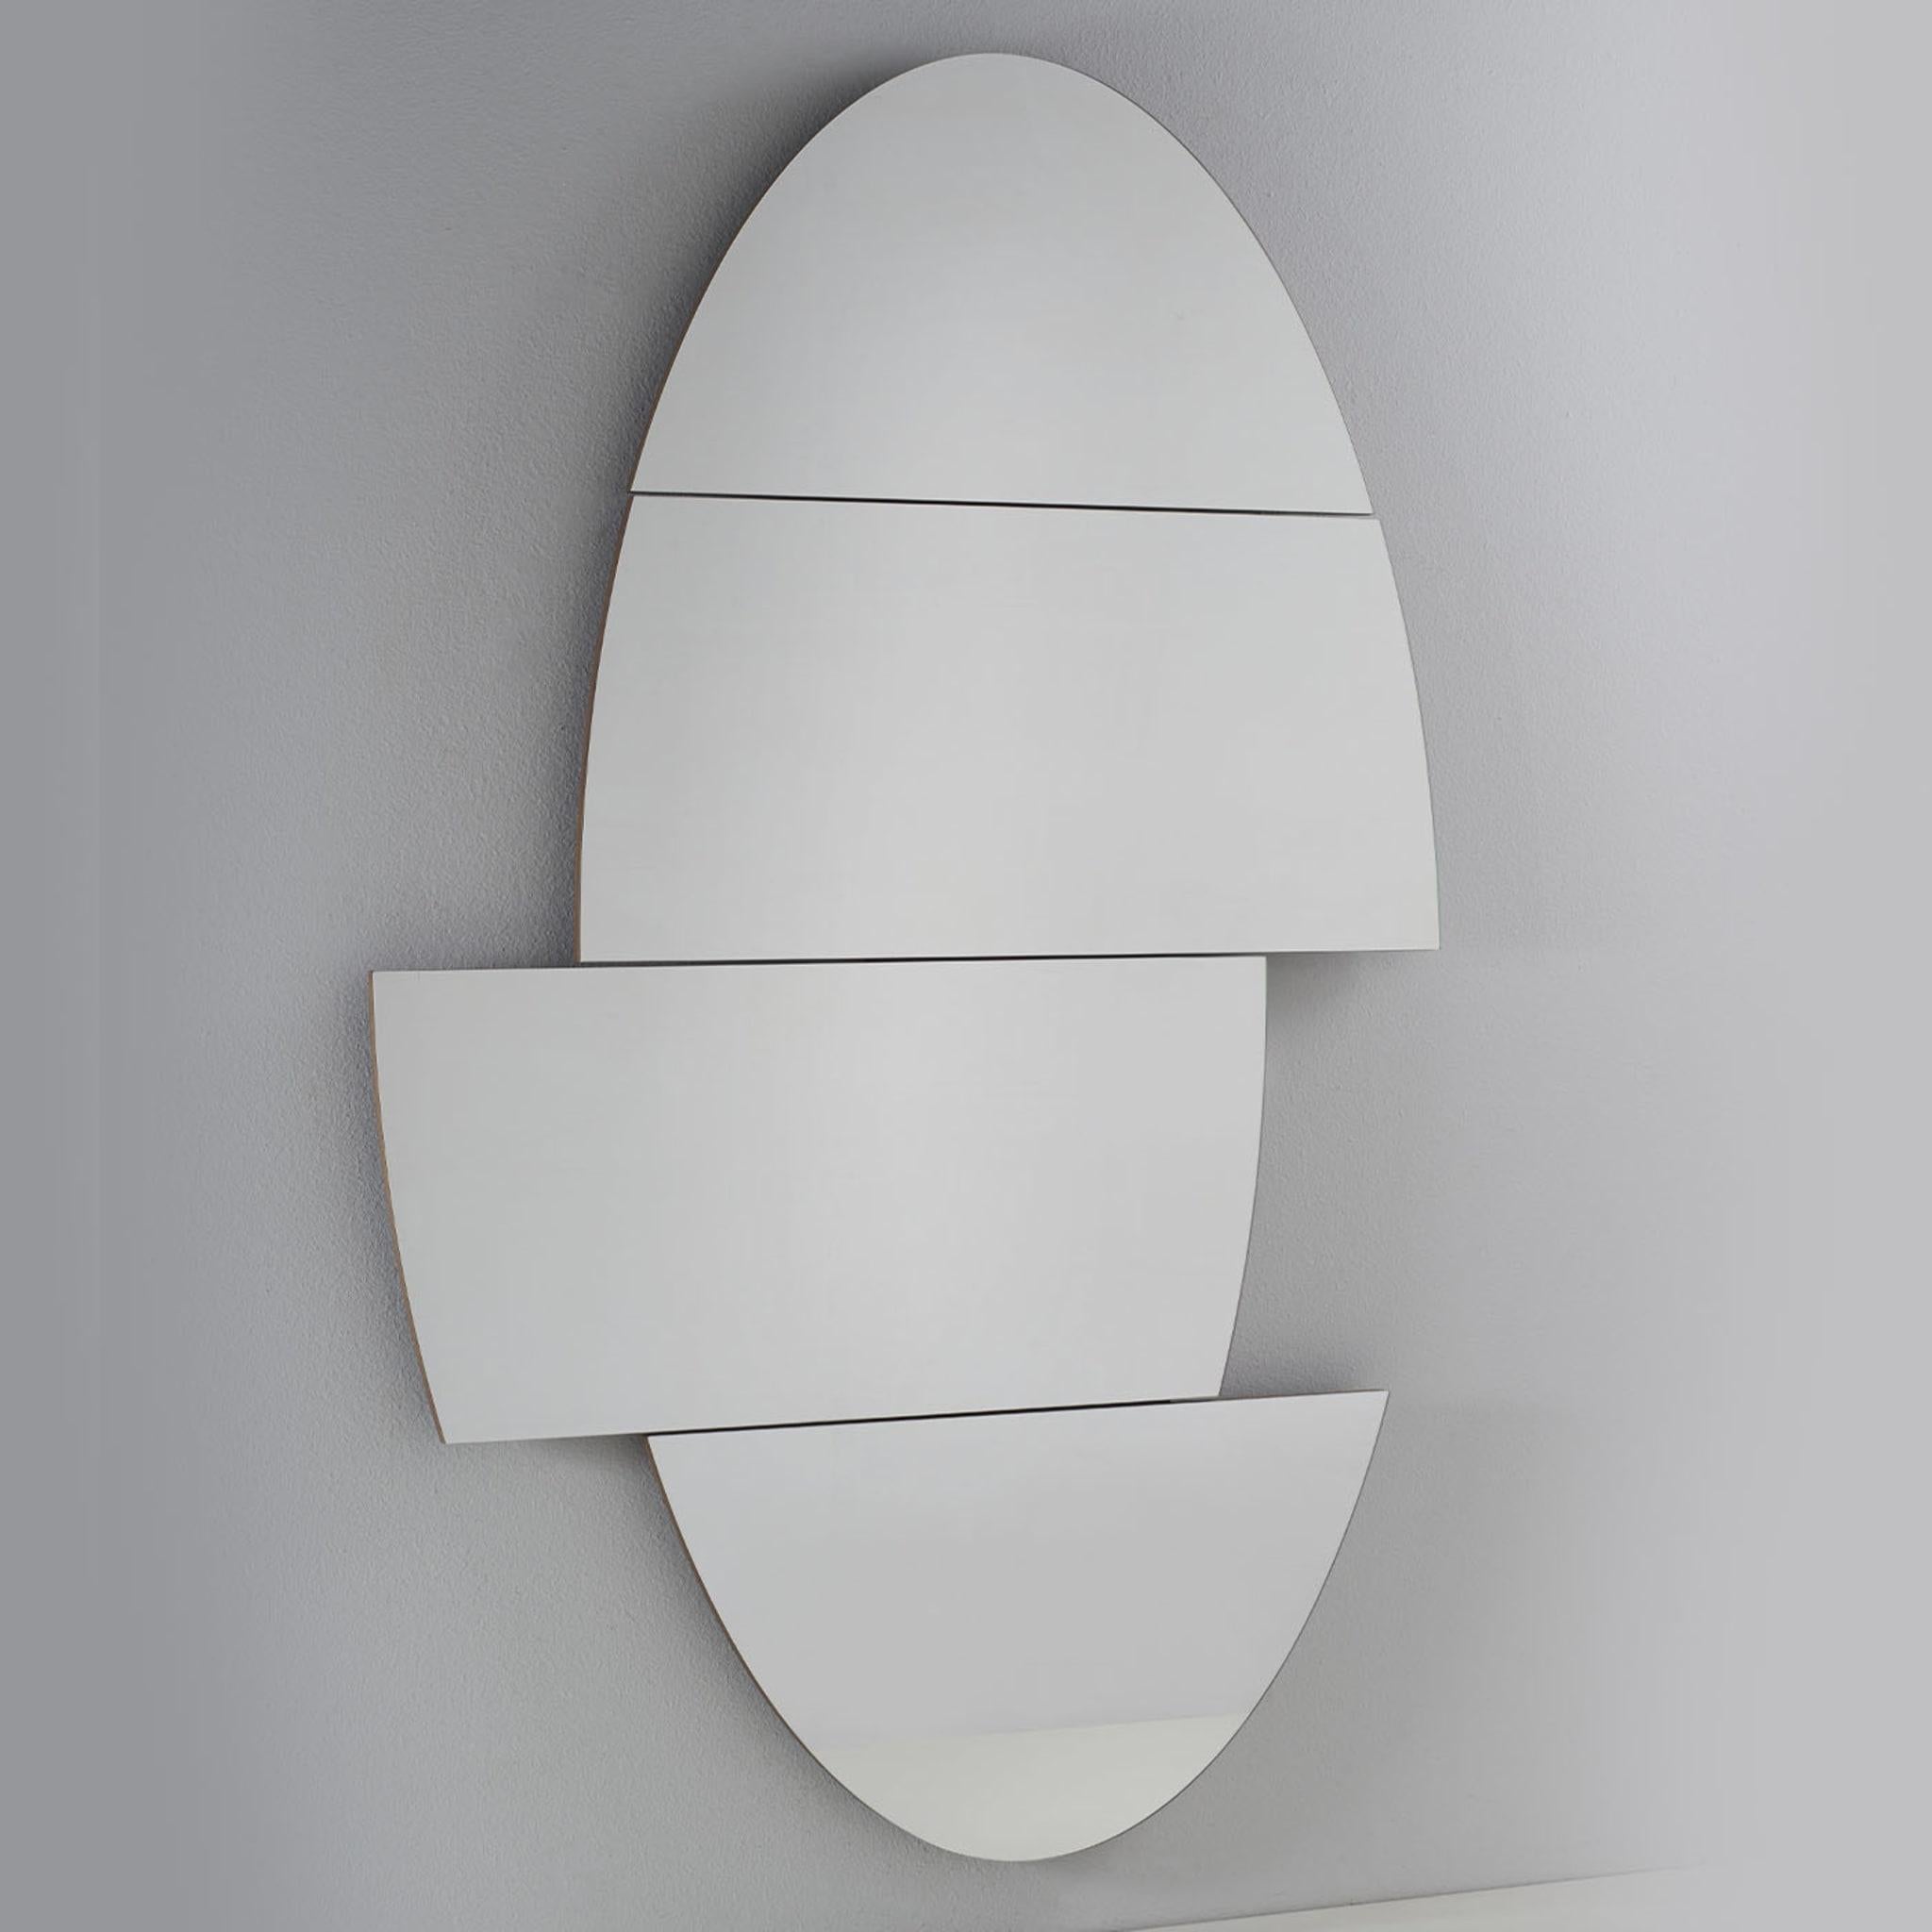 Playfully inspired by and named After the iconic illusionist, this oval mirror combines art and functionality within its transformist design. Four mirrored glass elements compose its structure, their movable quality allowing to achieve always new,